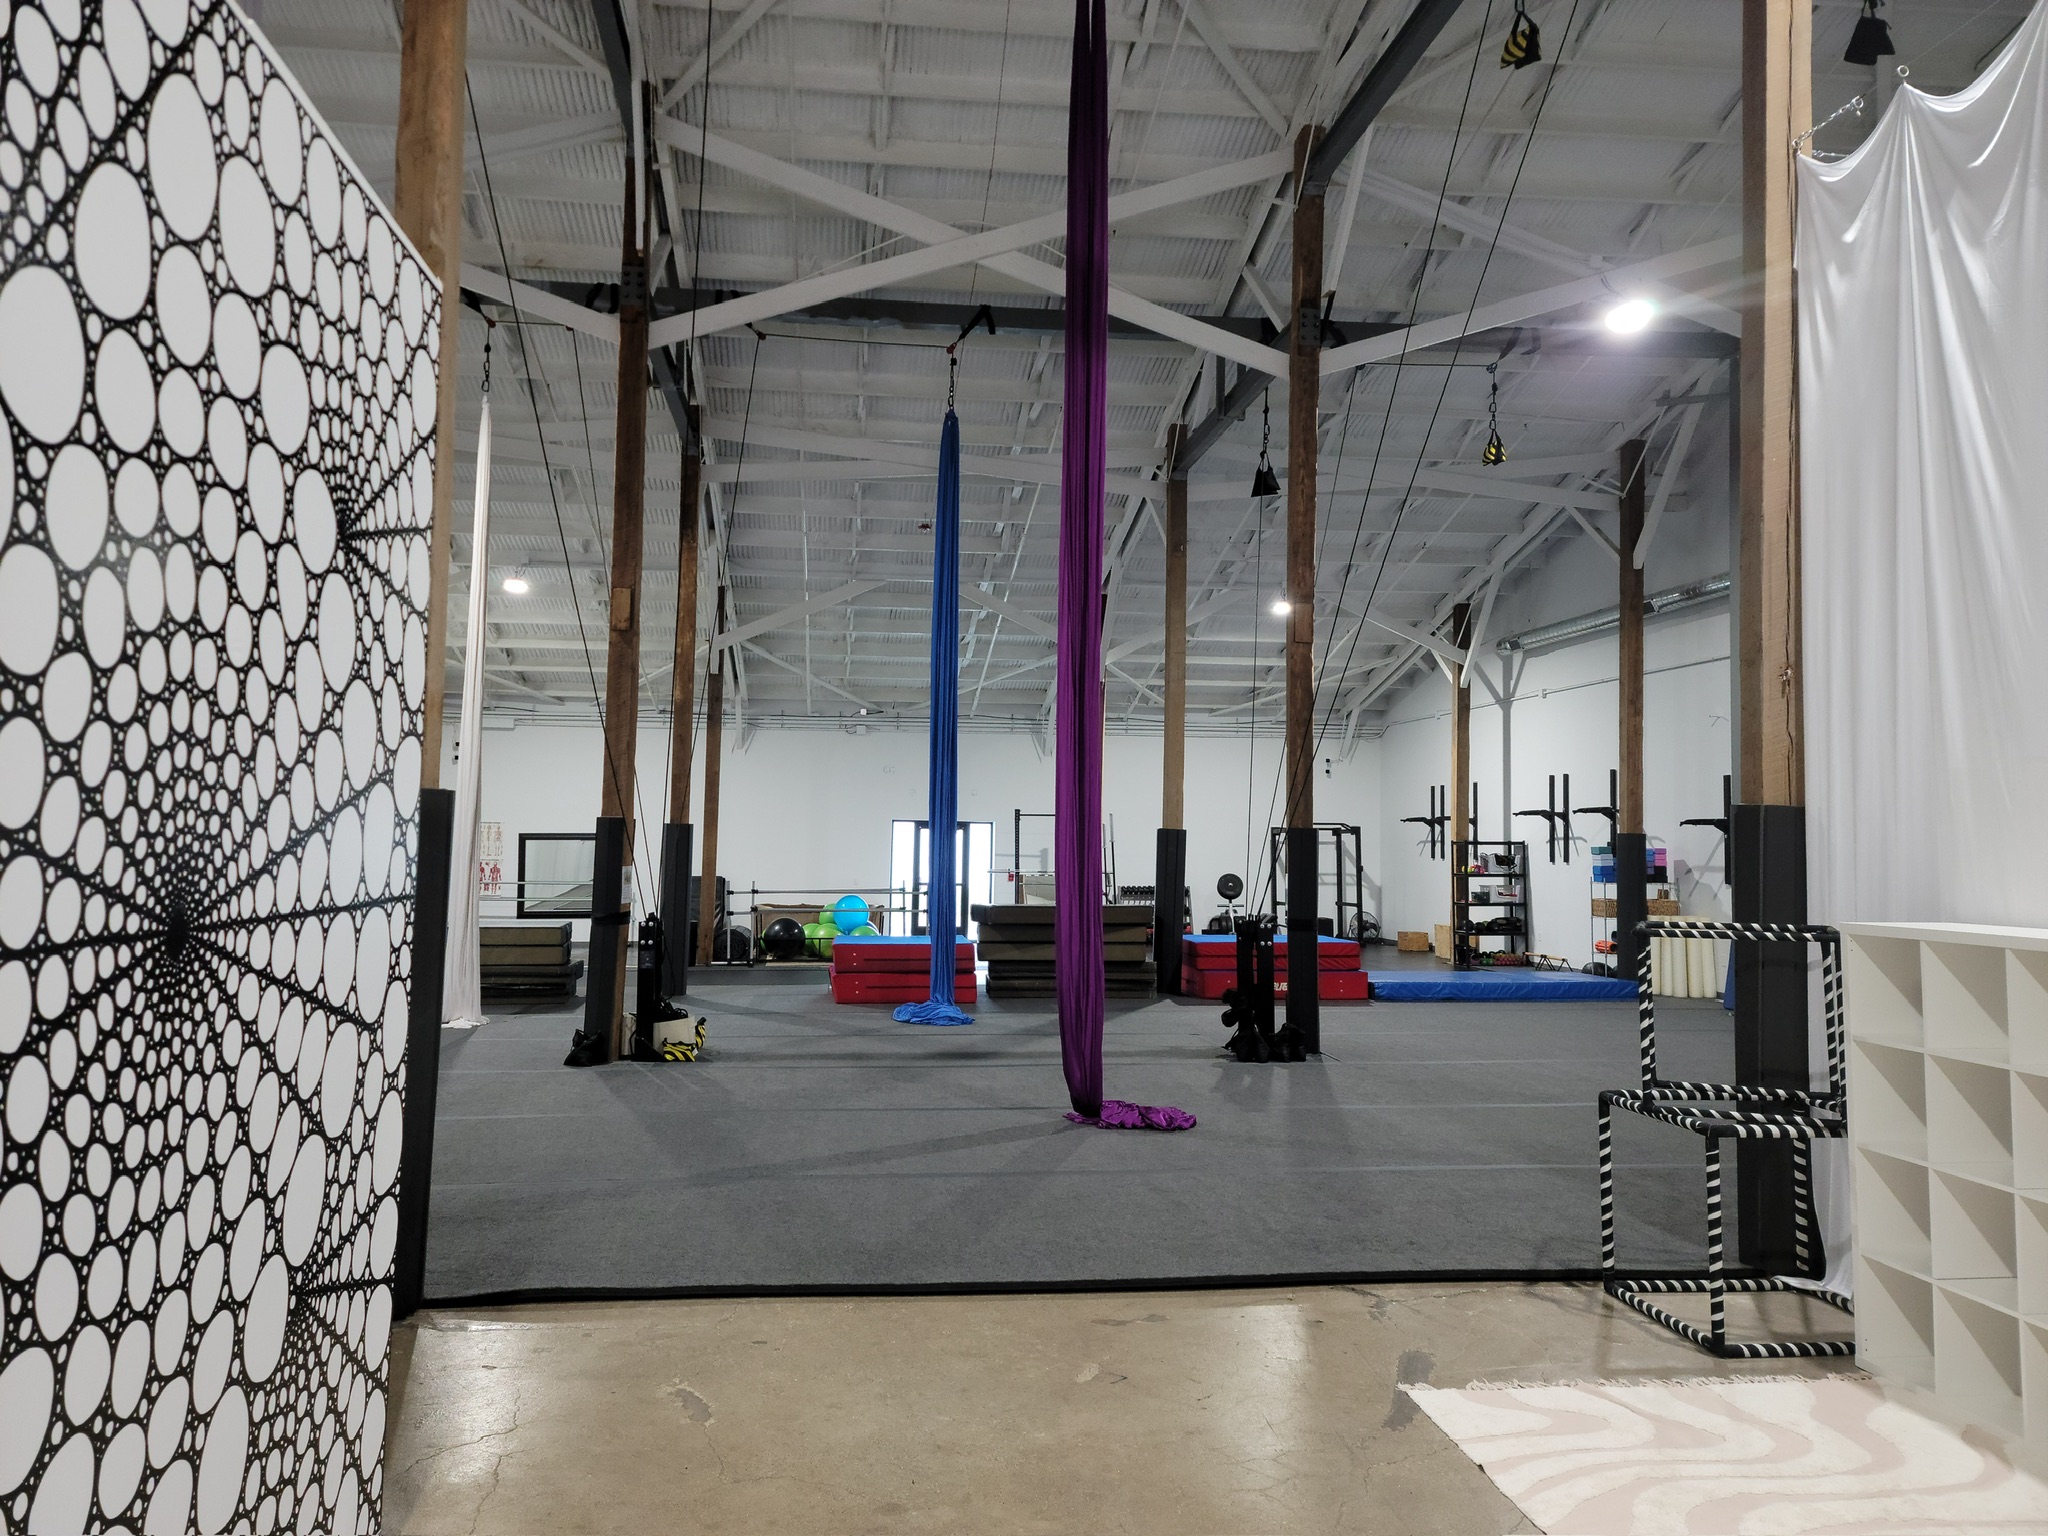 KY Aerial Arts, Circus, Pole, & Fitness Studio with Infrared Sauna - Sora  Aerial Arts